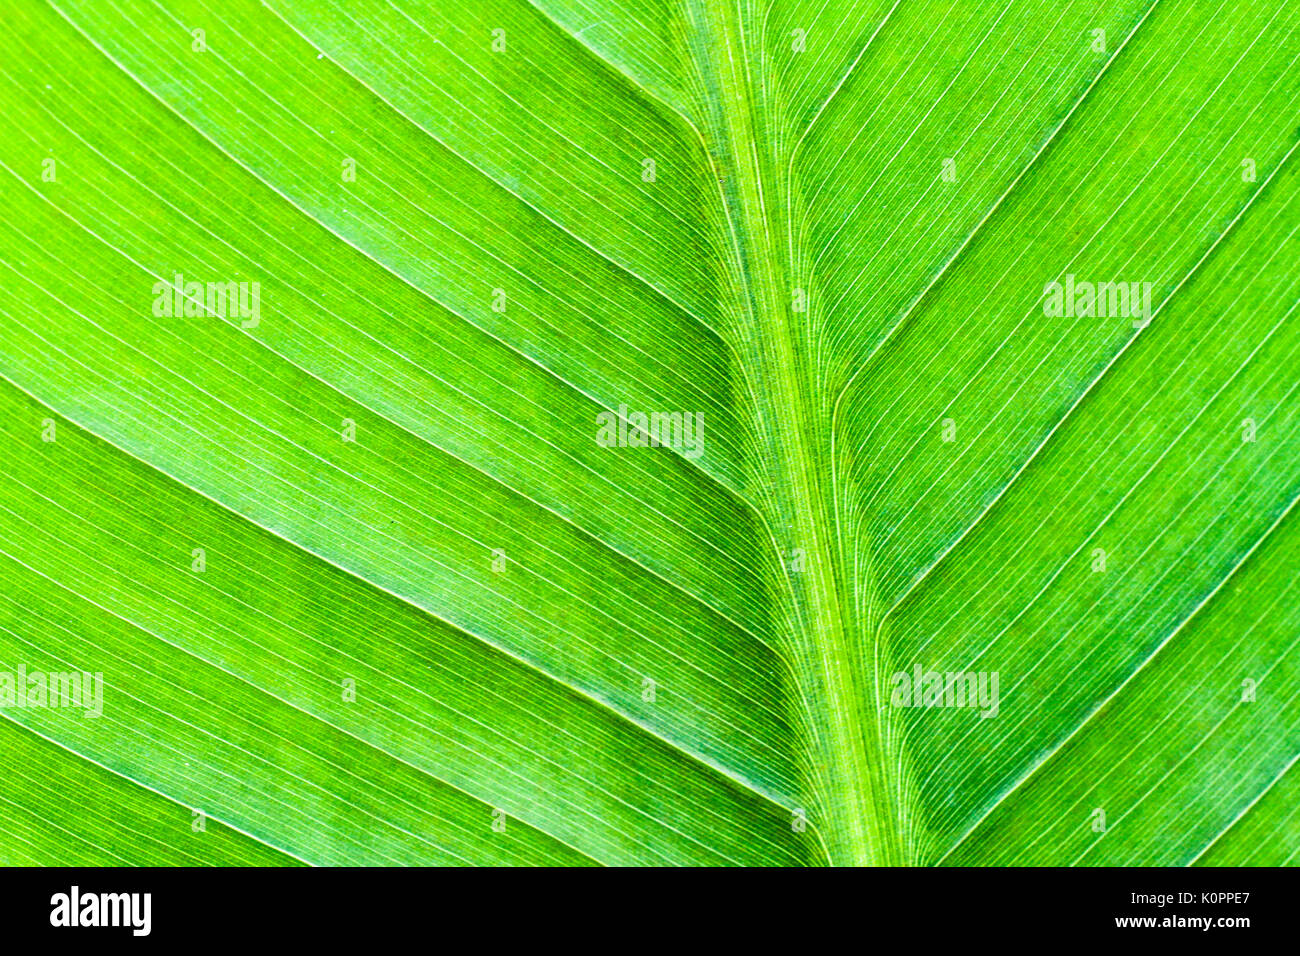 Fresh green banana leaf macro closeup photography detailing grooves and structure Stock Photo